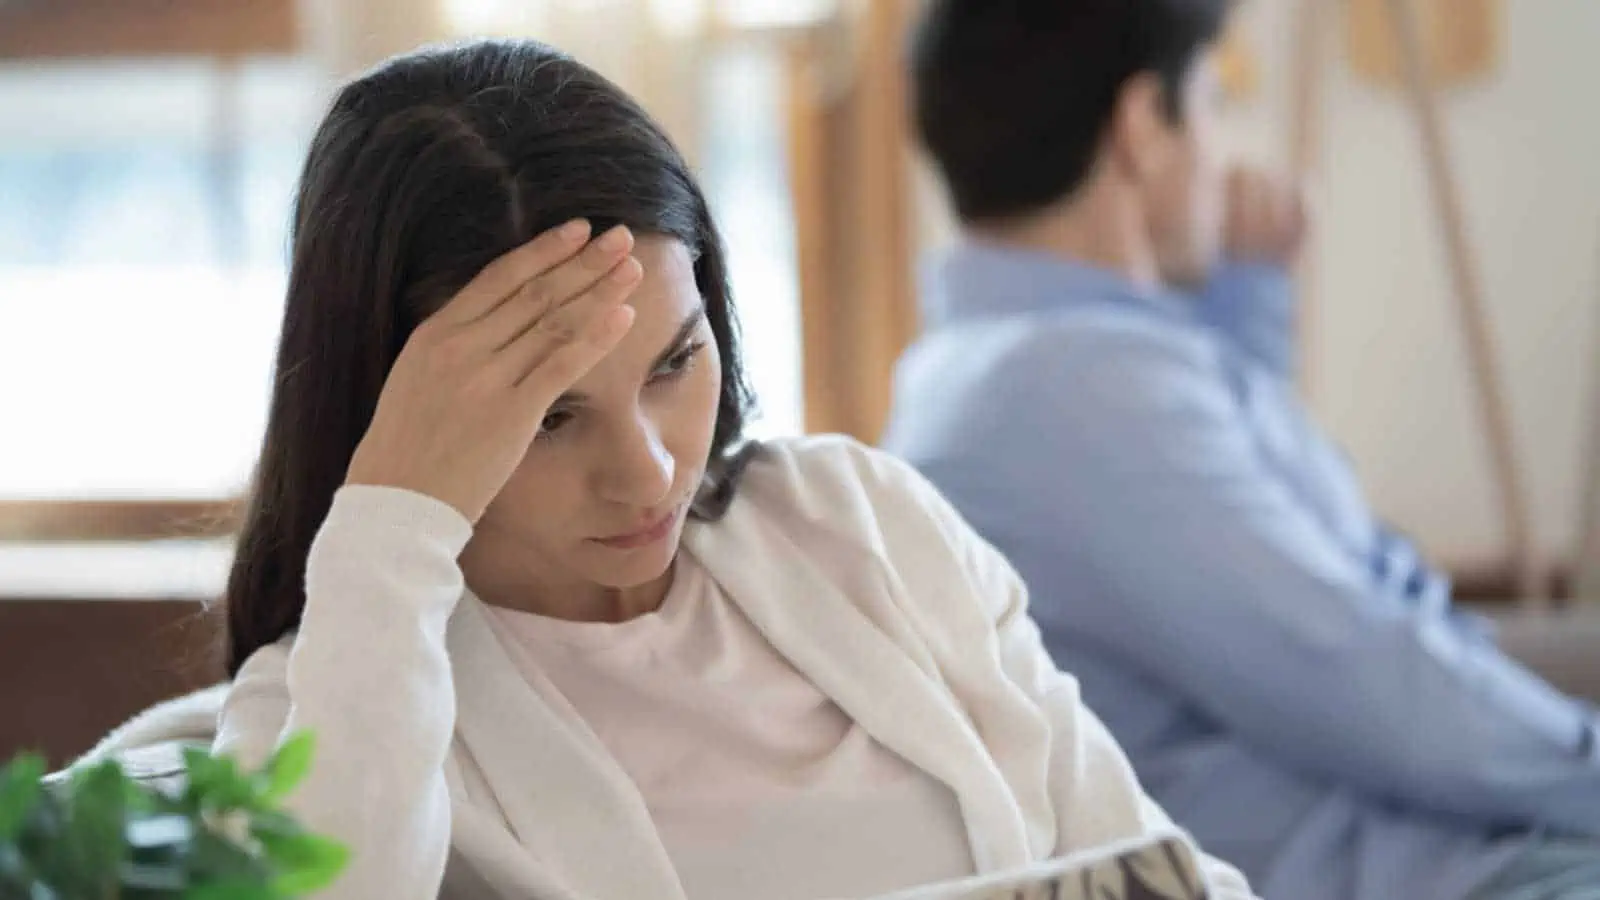 Woman stressed in relationship shutterstock MSN